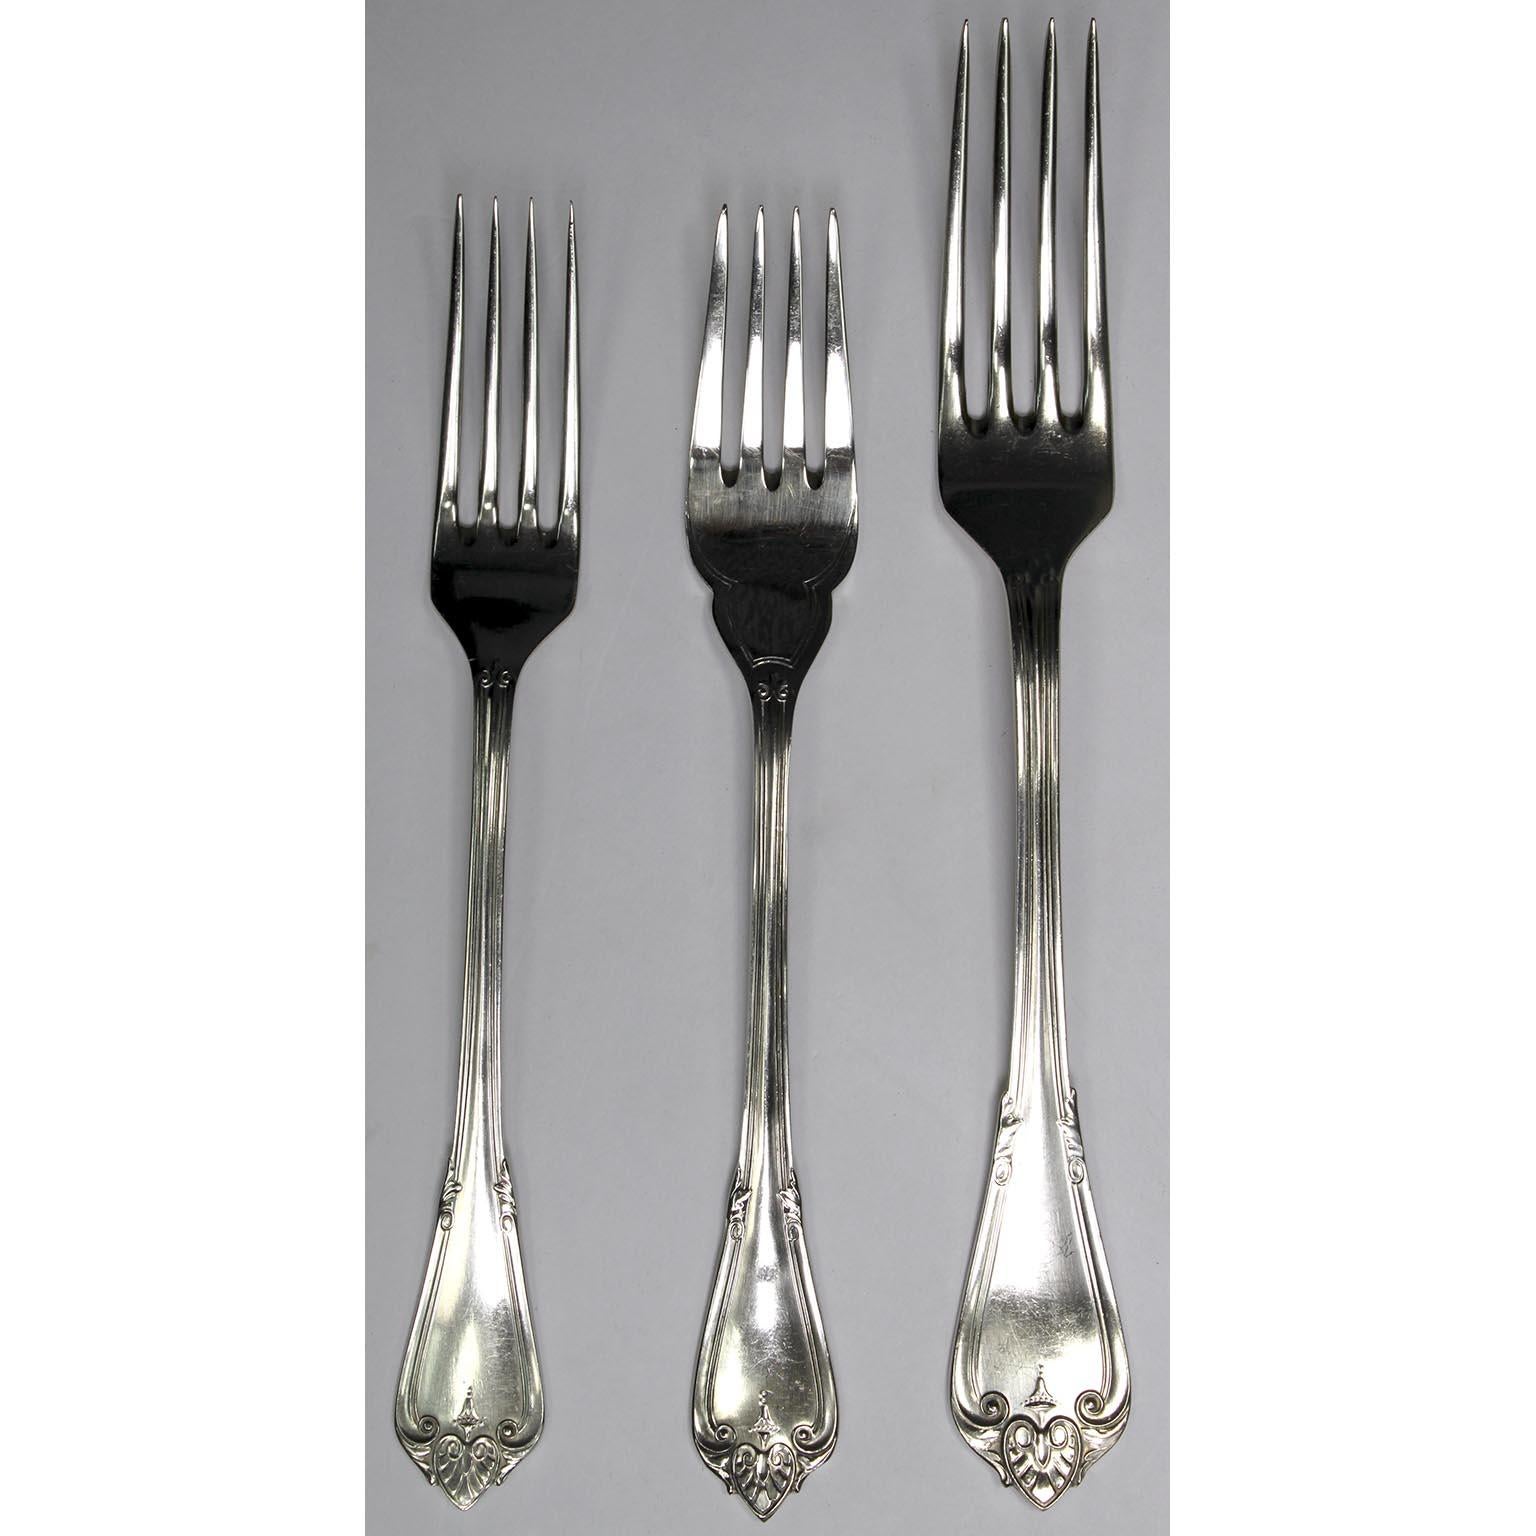 A Fine Early 20th Century 152 Piece Austrian Flatware Set by Berndorf Alpacca For Sale 1